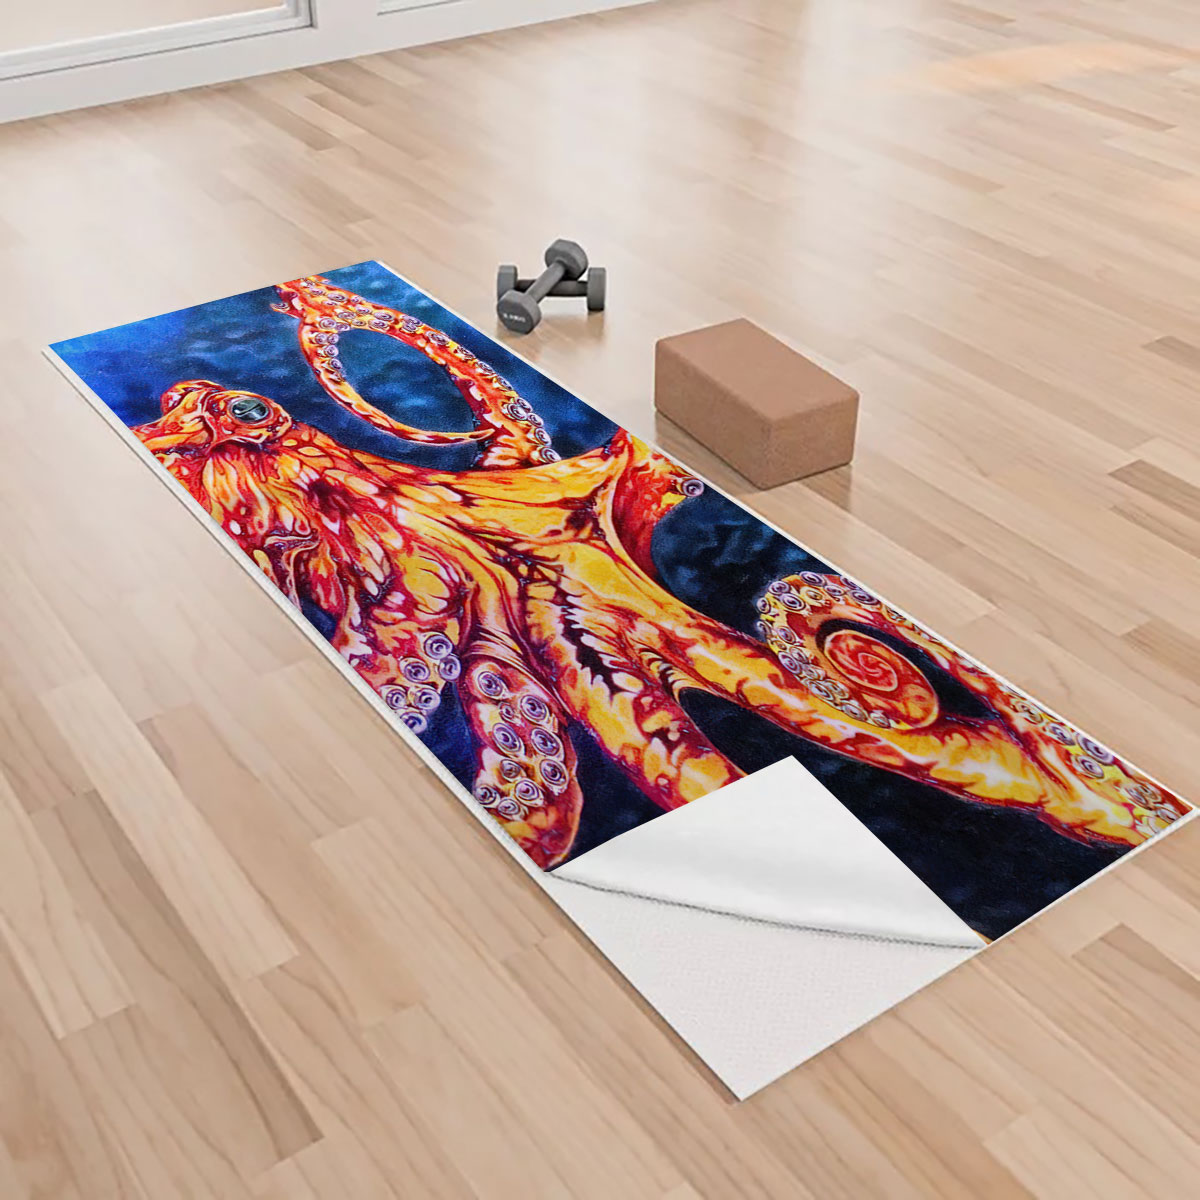 Psychedelic Octopus Yoga Towels